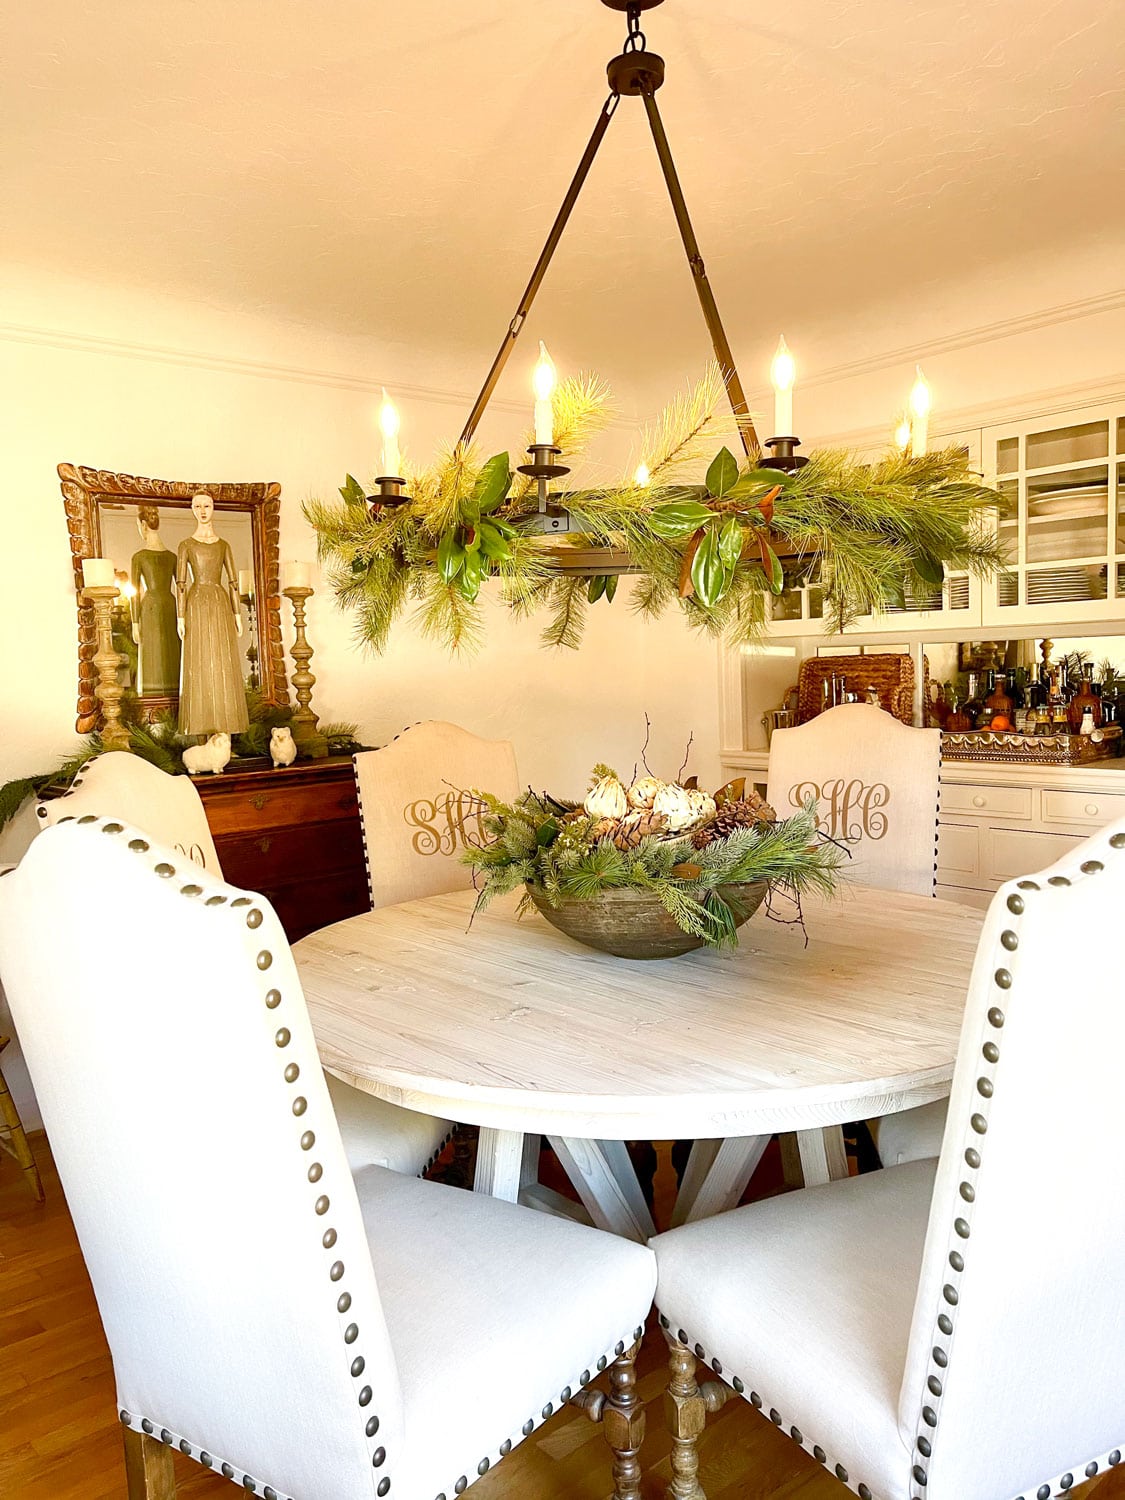 Cindy Hatterwsley's Dining Room at Christmas